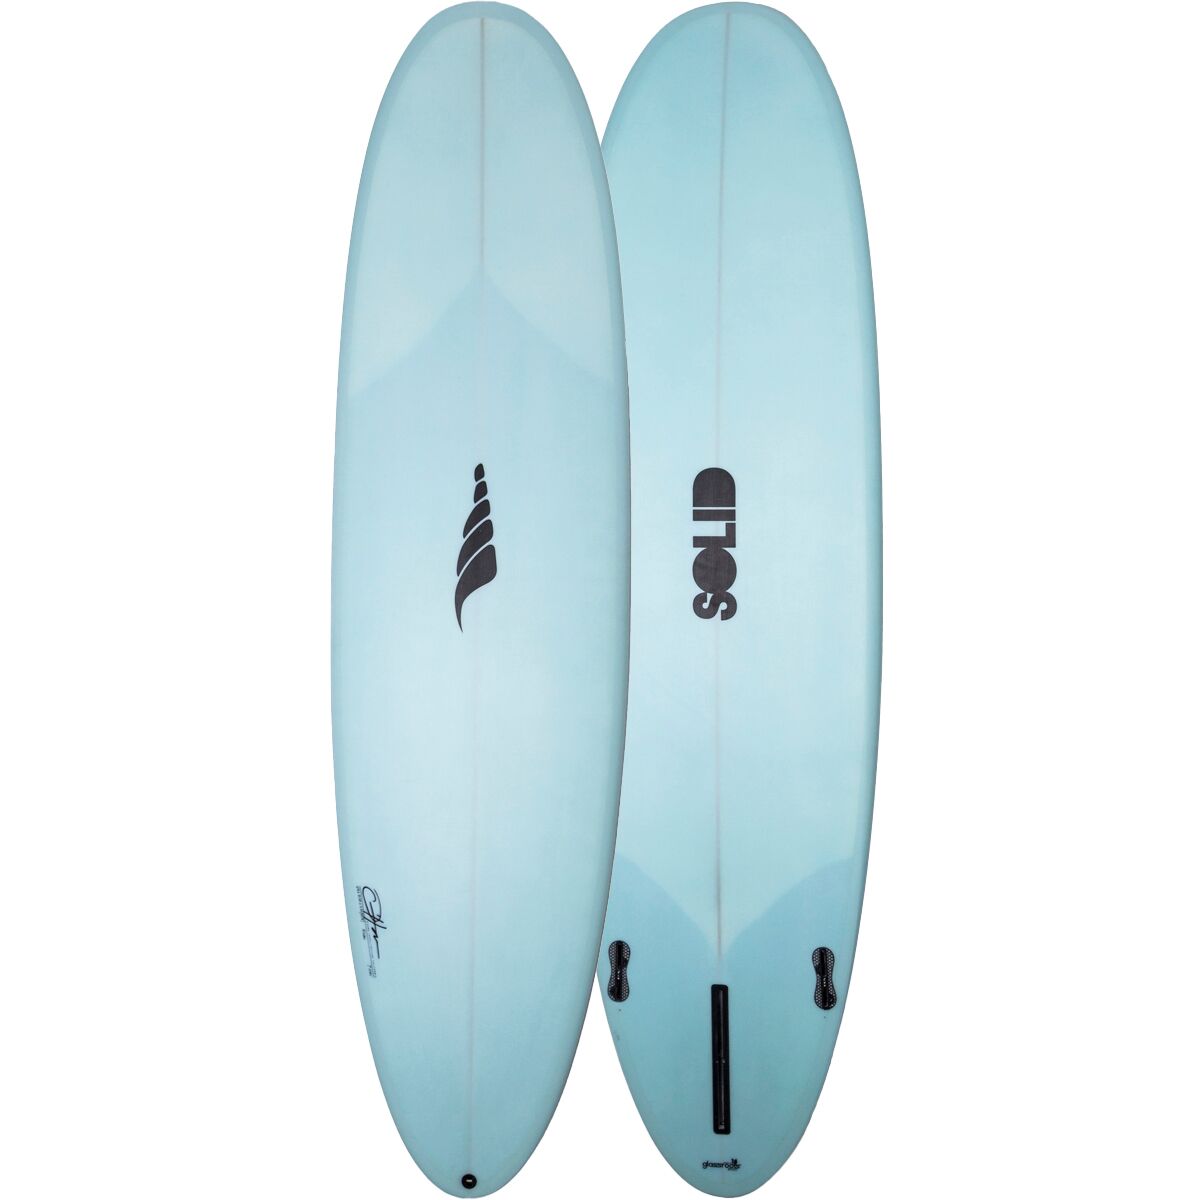 Solid Surfboards Frisbee Midlength Surfboard